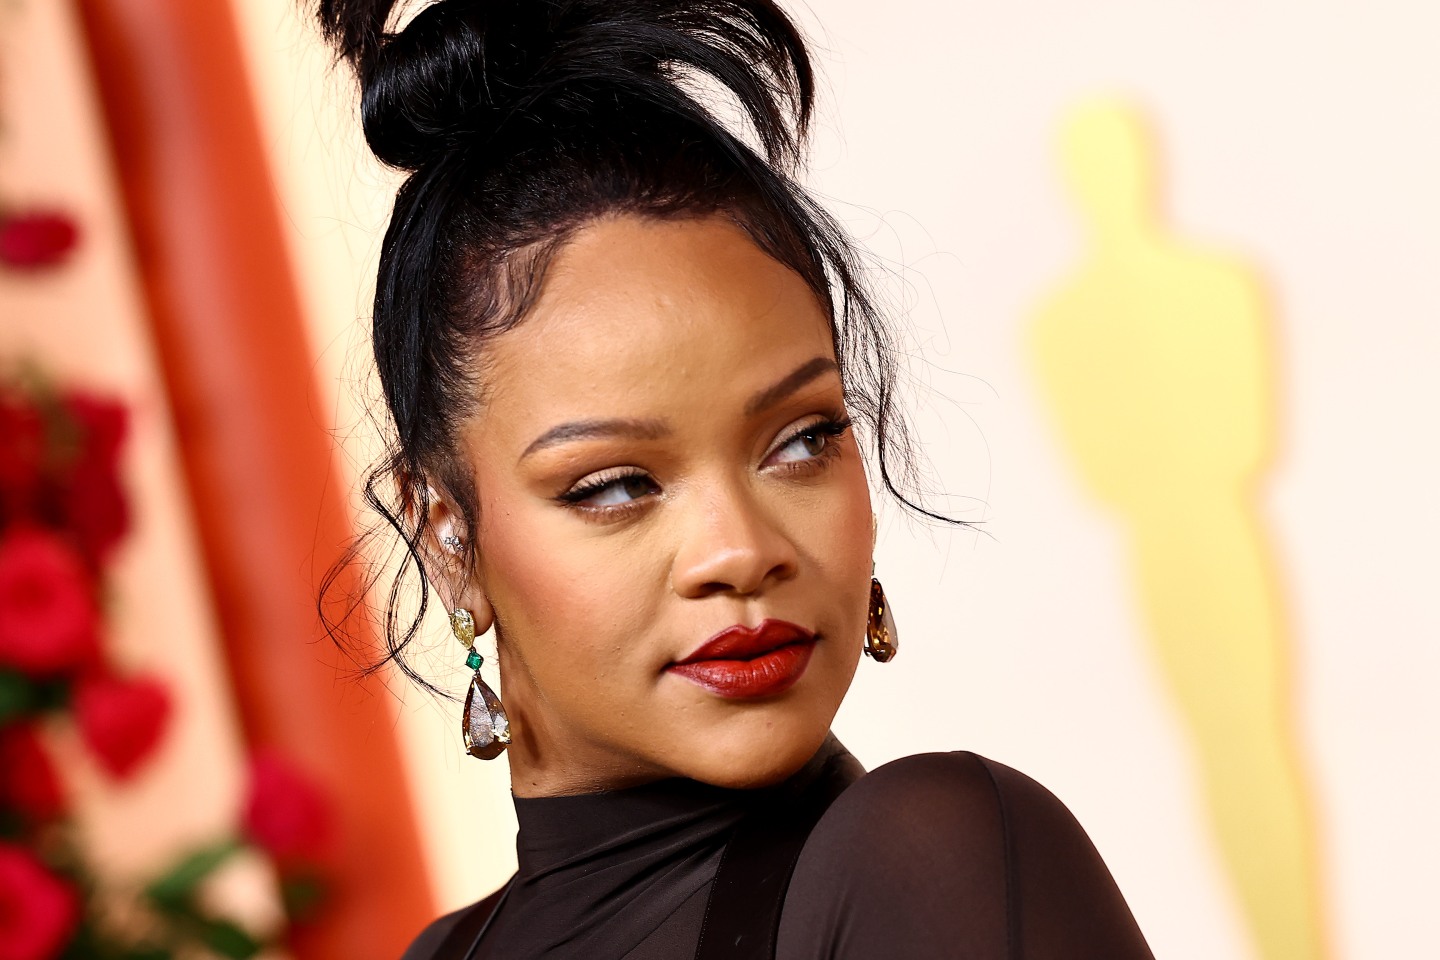 Live News: Rihanna gives <i>R9</i> update, Taylor Swift breaks streaming record, and more